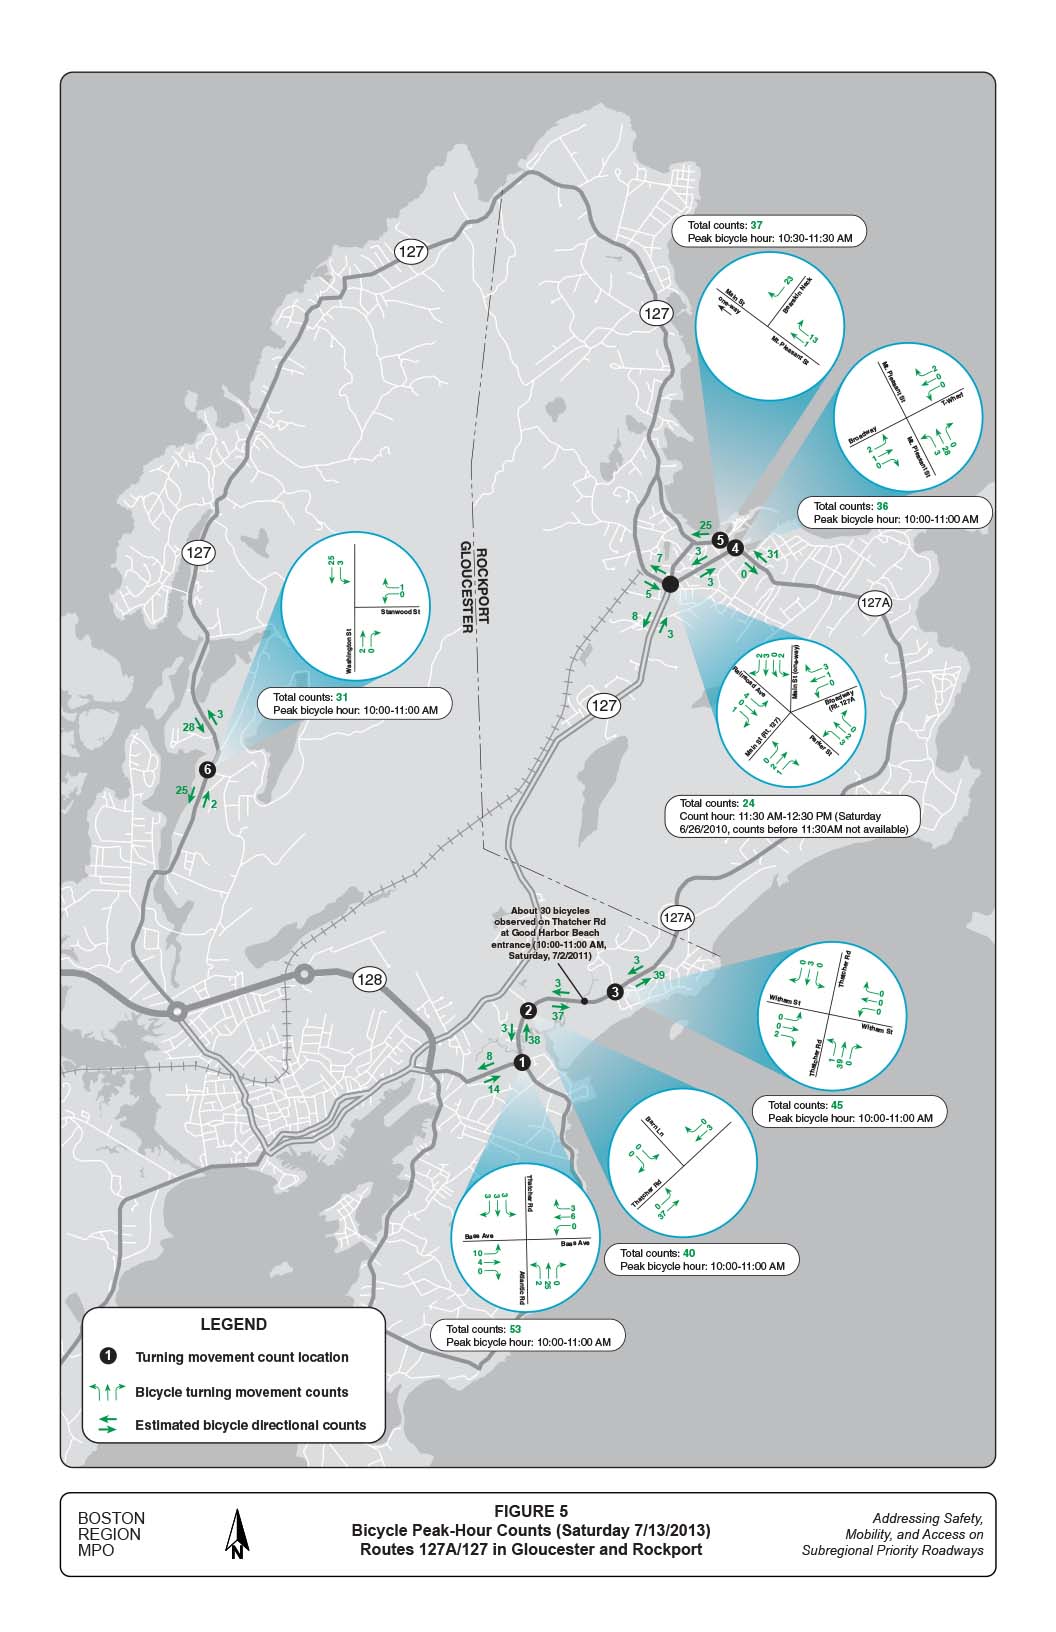 FIGURE 5. Bicycle Peak-Hour Counts (Saturday 7/13/2013) Routes 127A/127 in Gloucester and Rockport
This black-and-white map of the study area depicts: Turning movement count locations; estimated bicycle directional counts; and bicycle turning movement counts.
